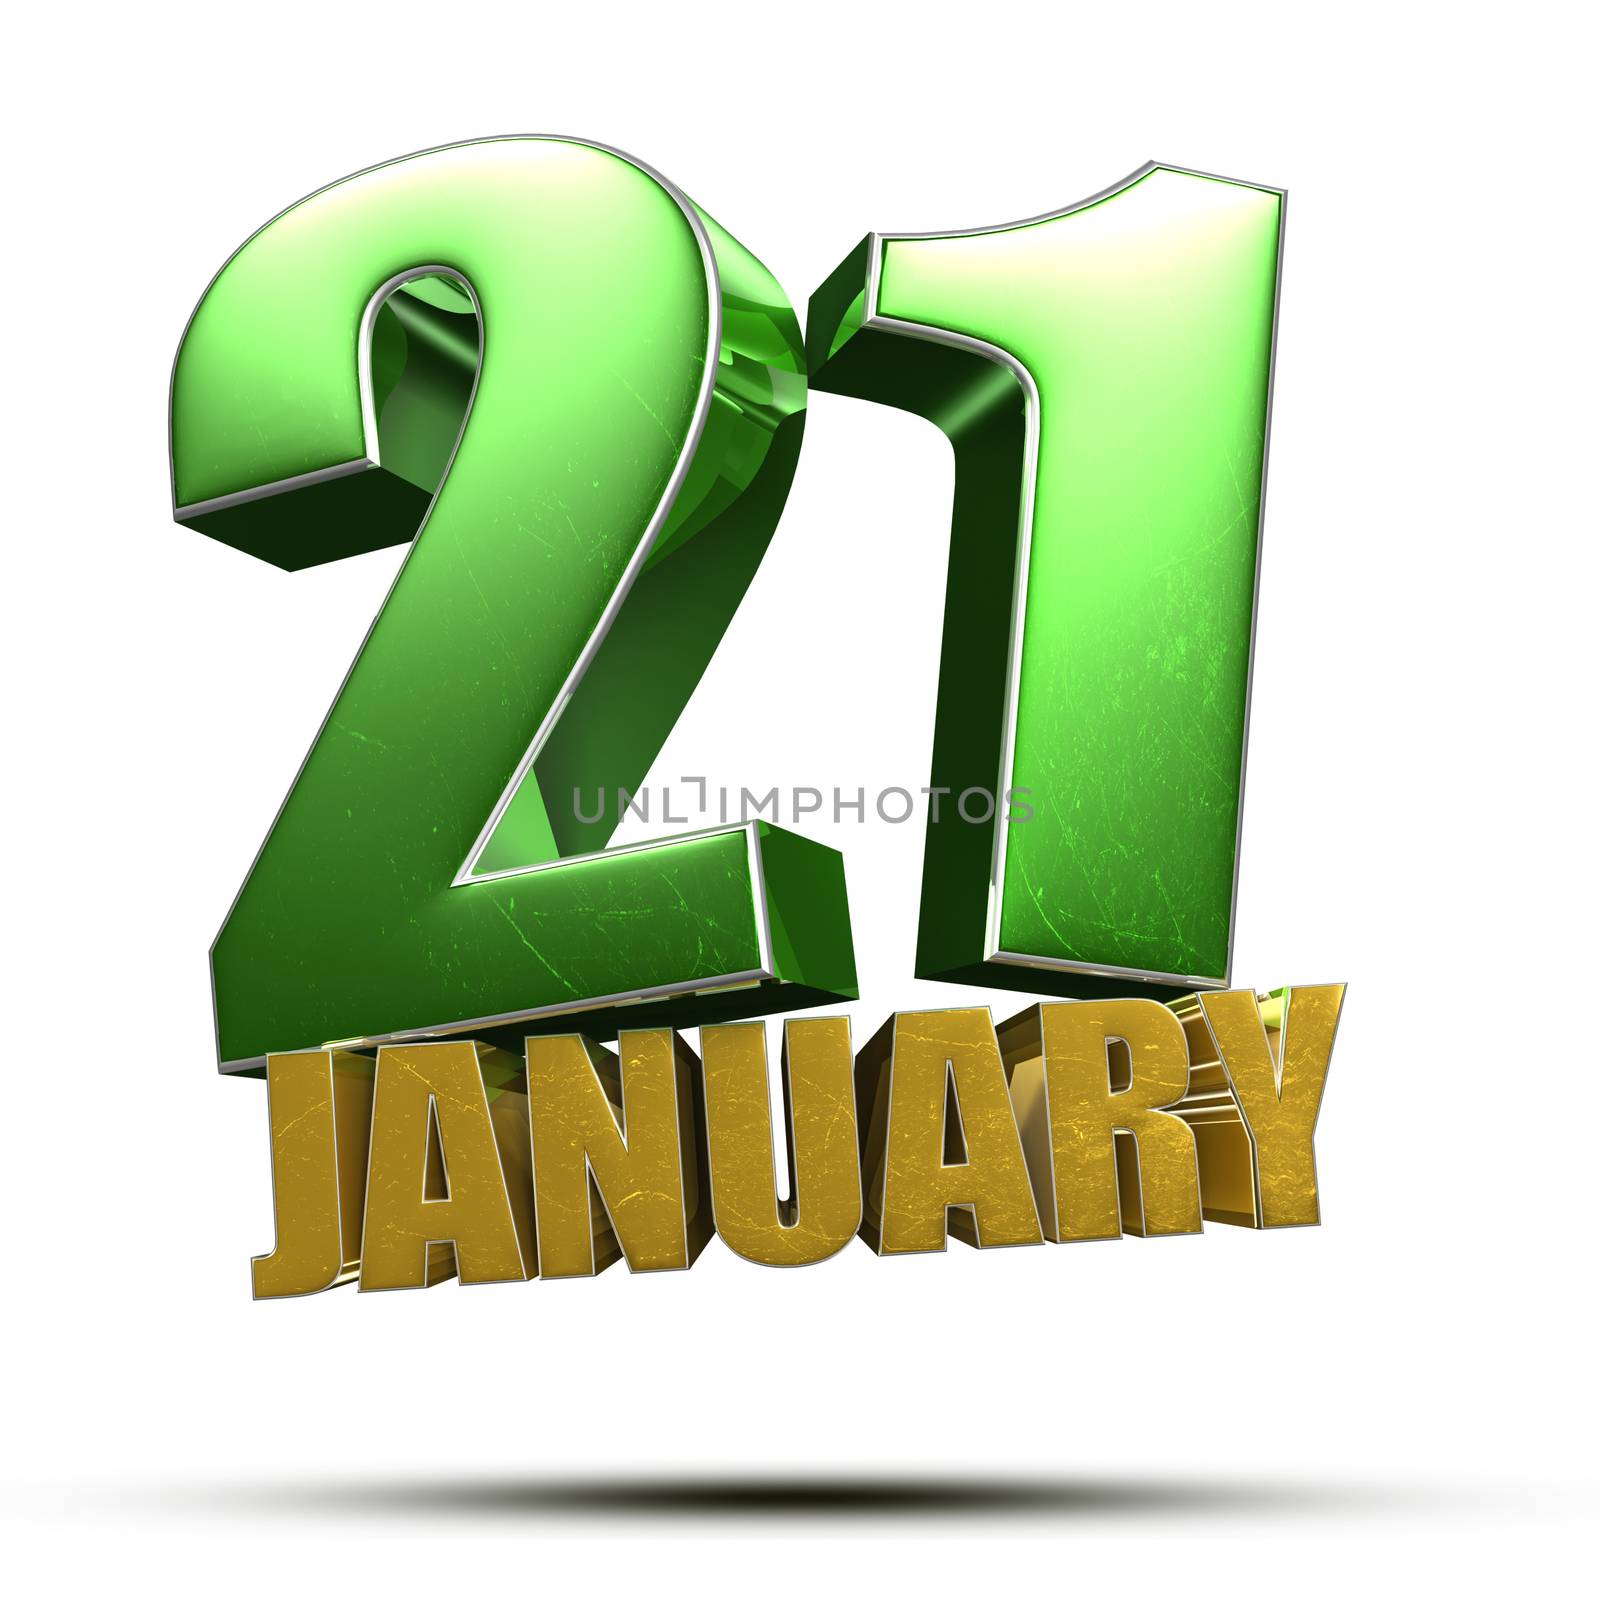 21 January 3d illustration isolated on white background.(with Clipping Path).